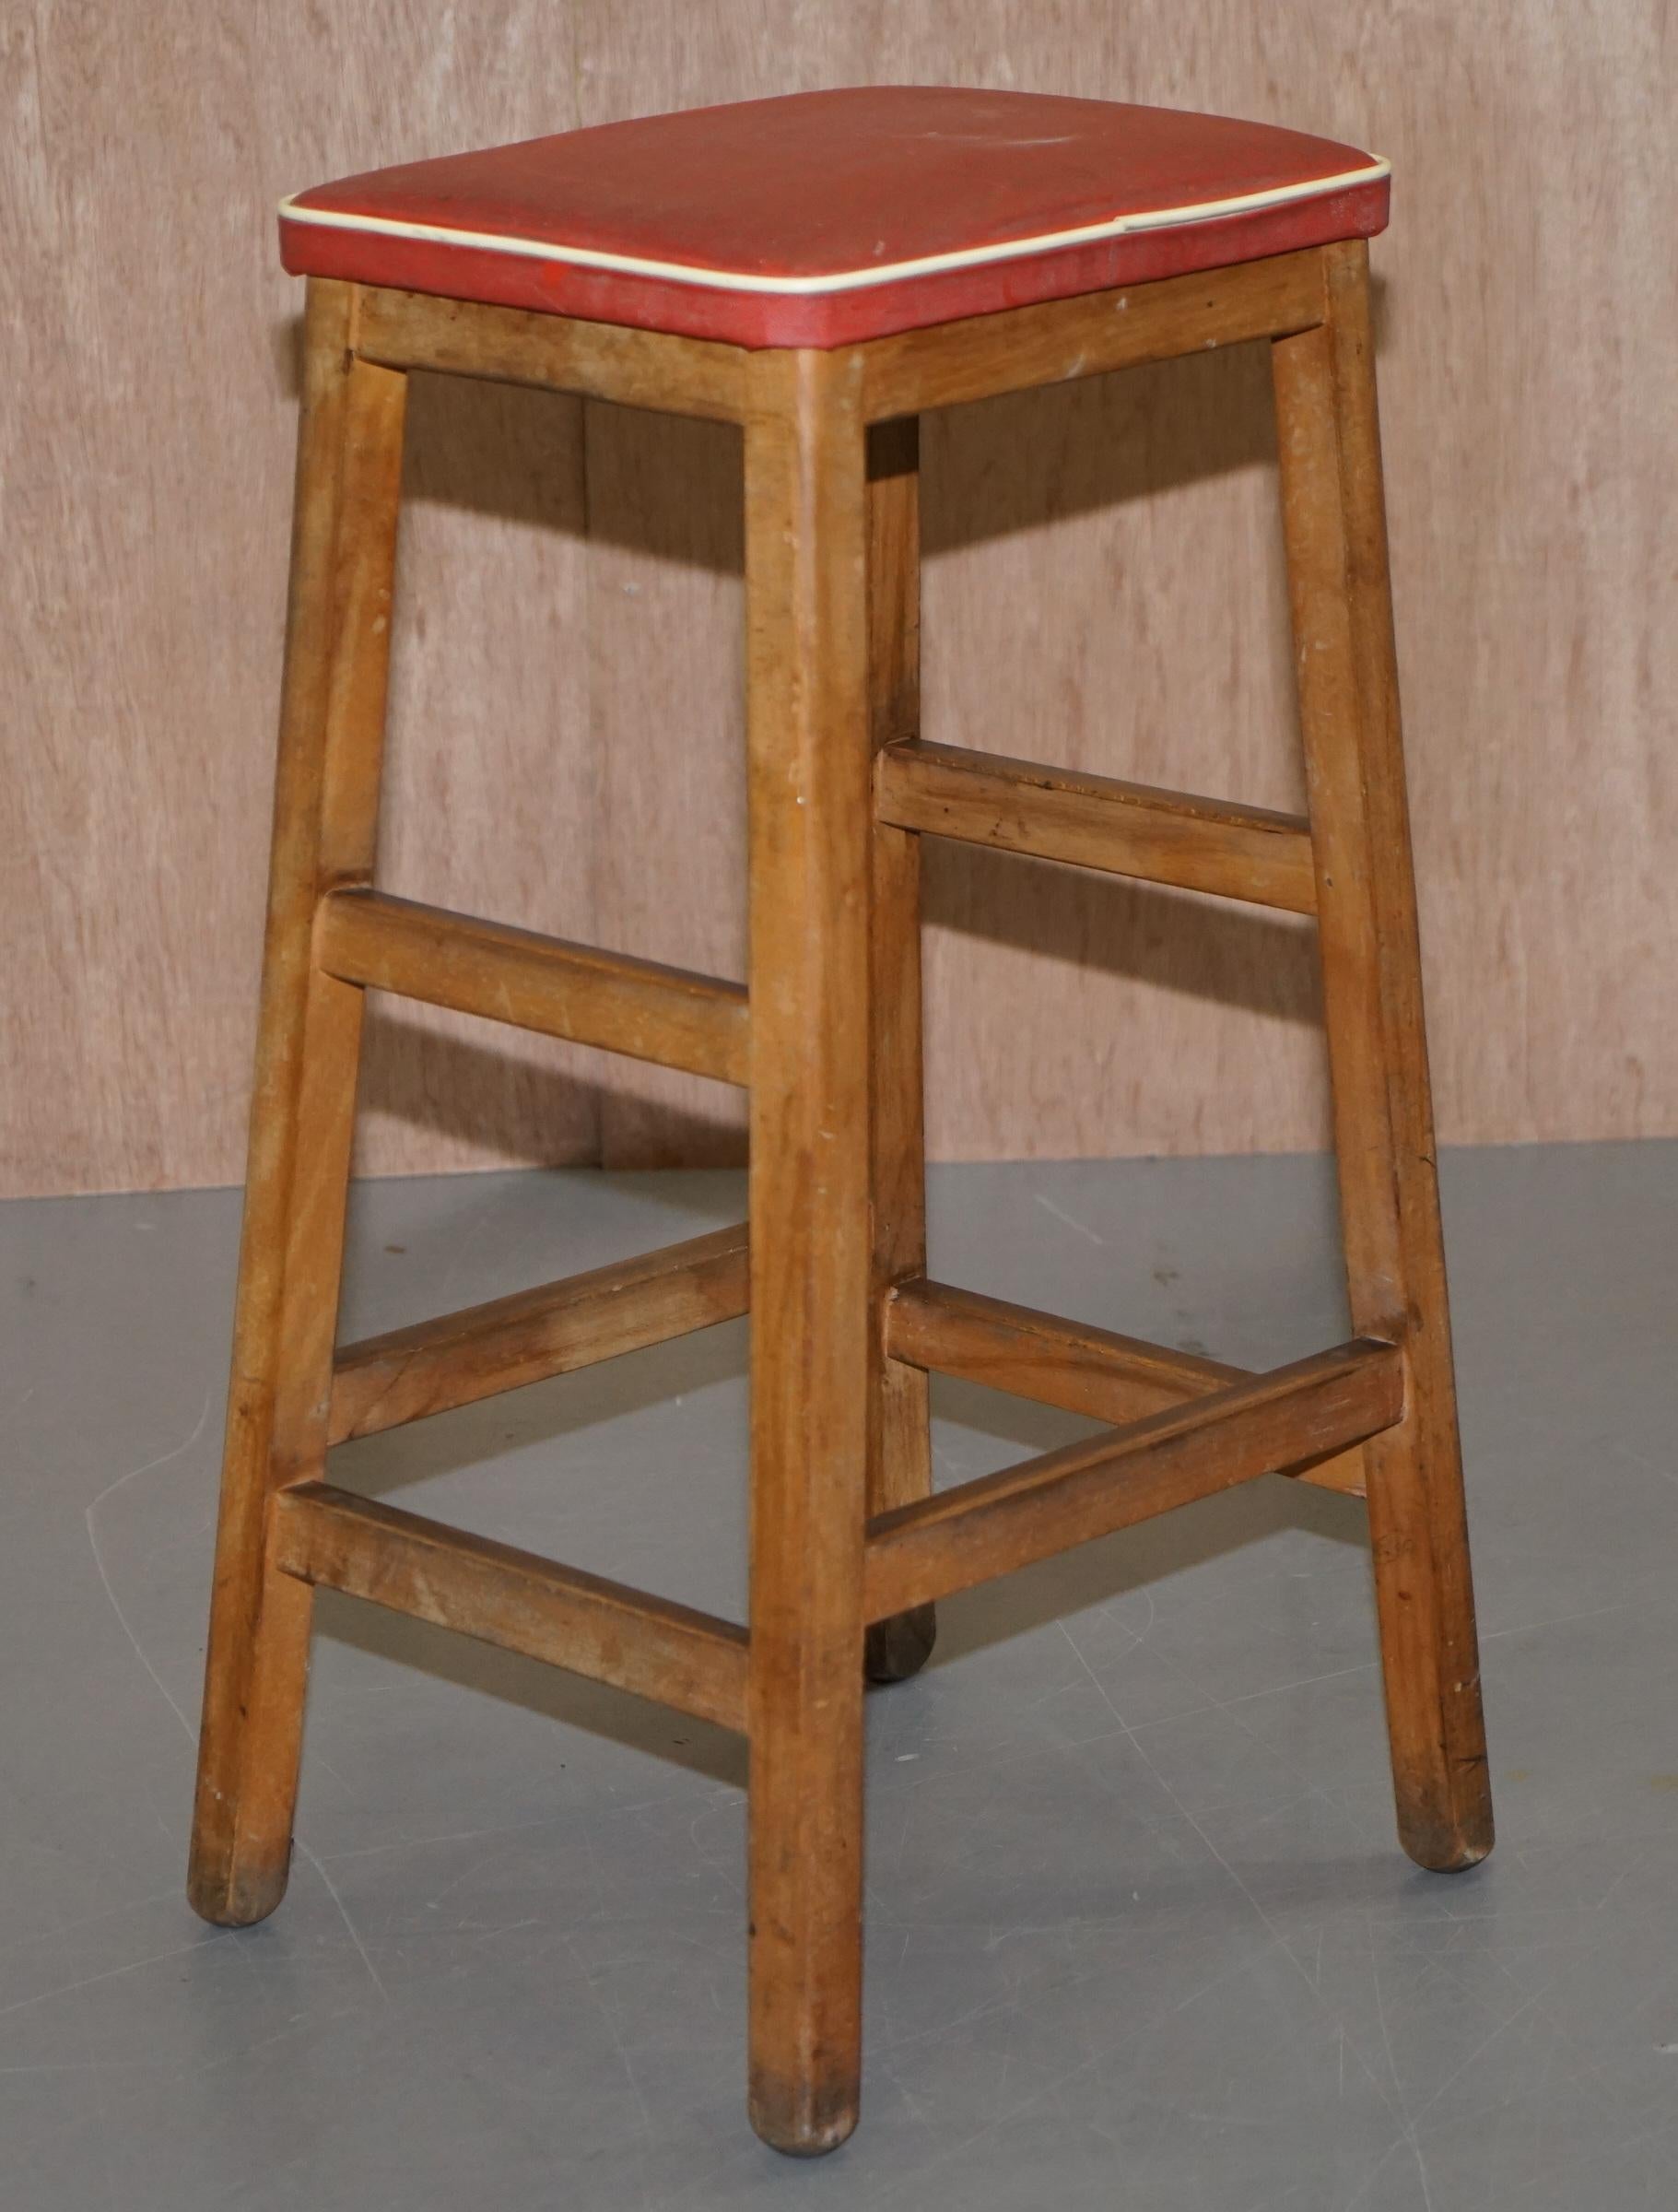 Hand-Crafted Suite of Three Progressive Modern Industries Stamped Artist Art School Stools For Sale